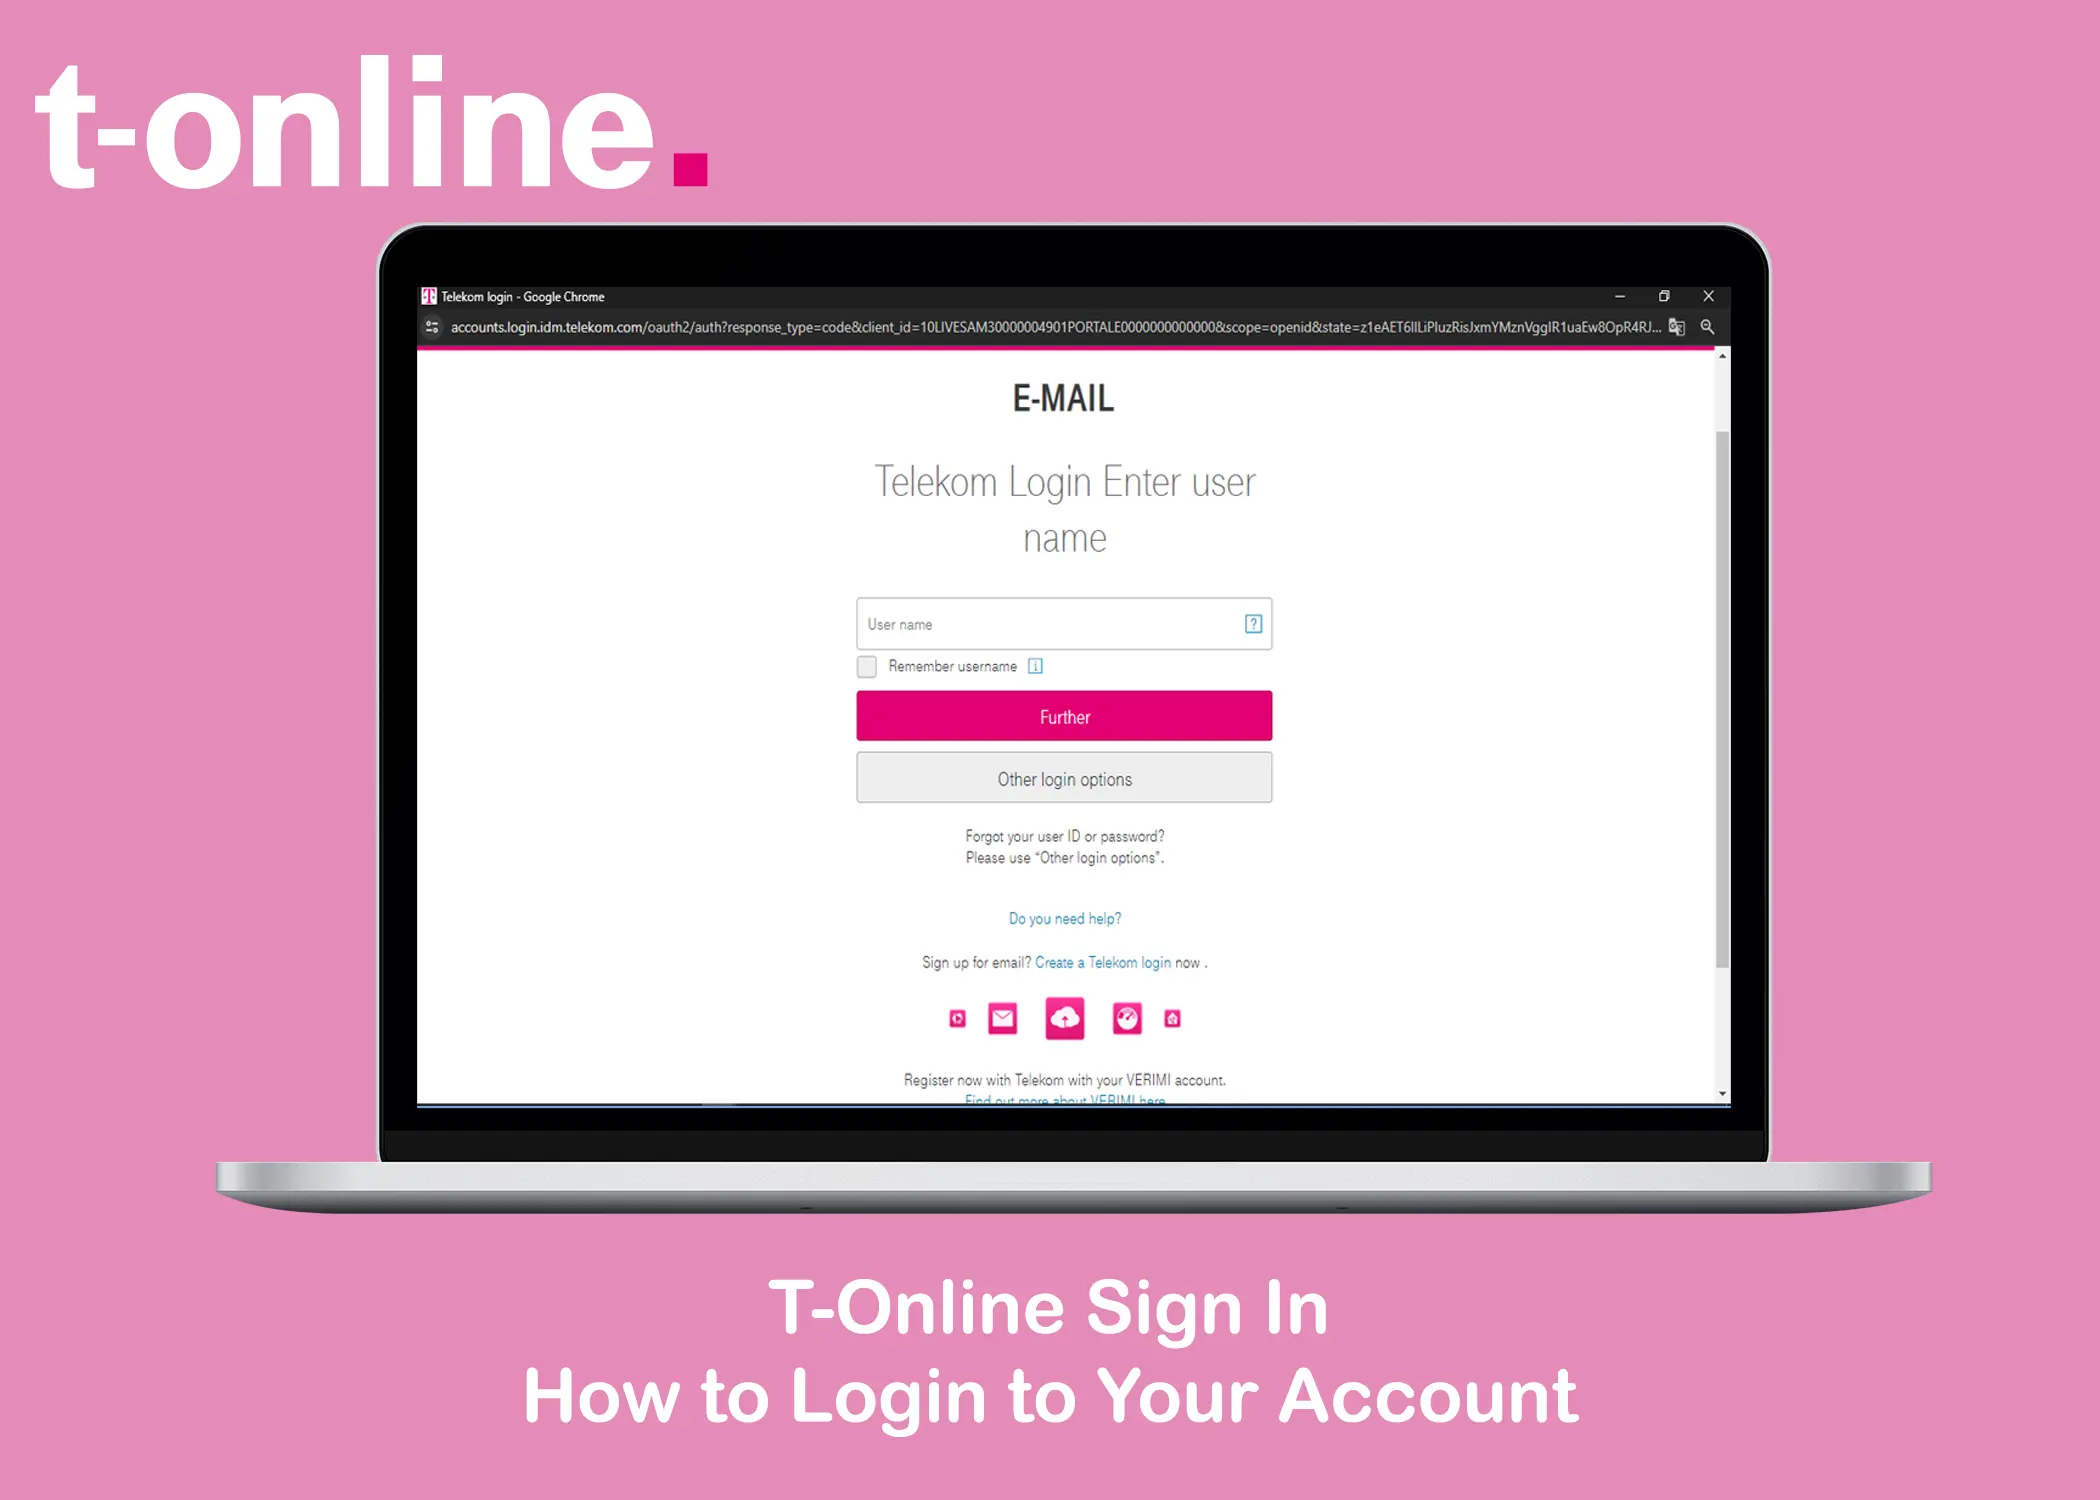 T-Online Sign In - How to Login to Your Account